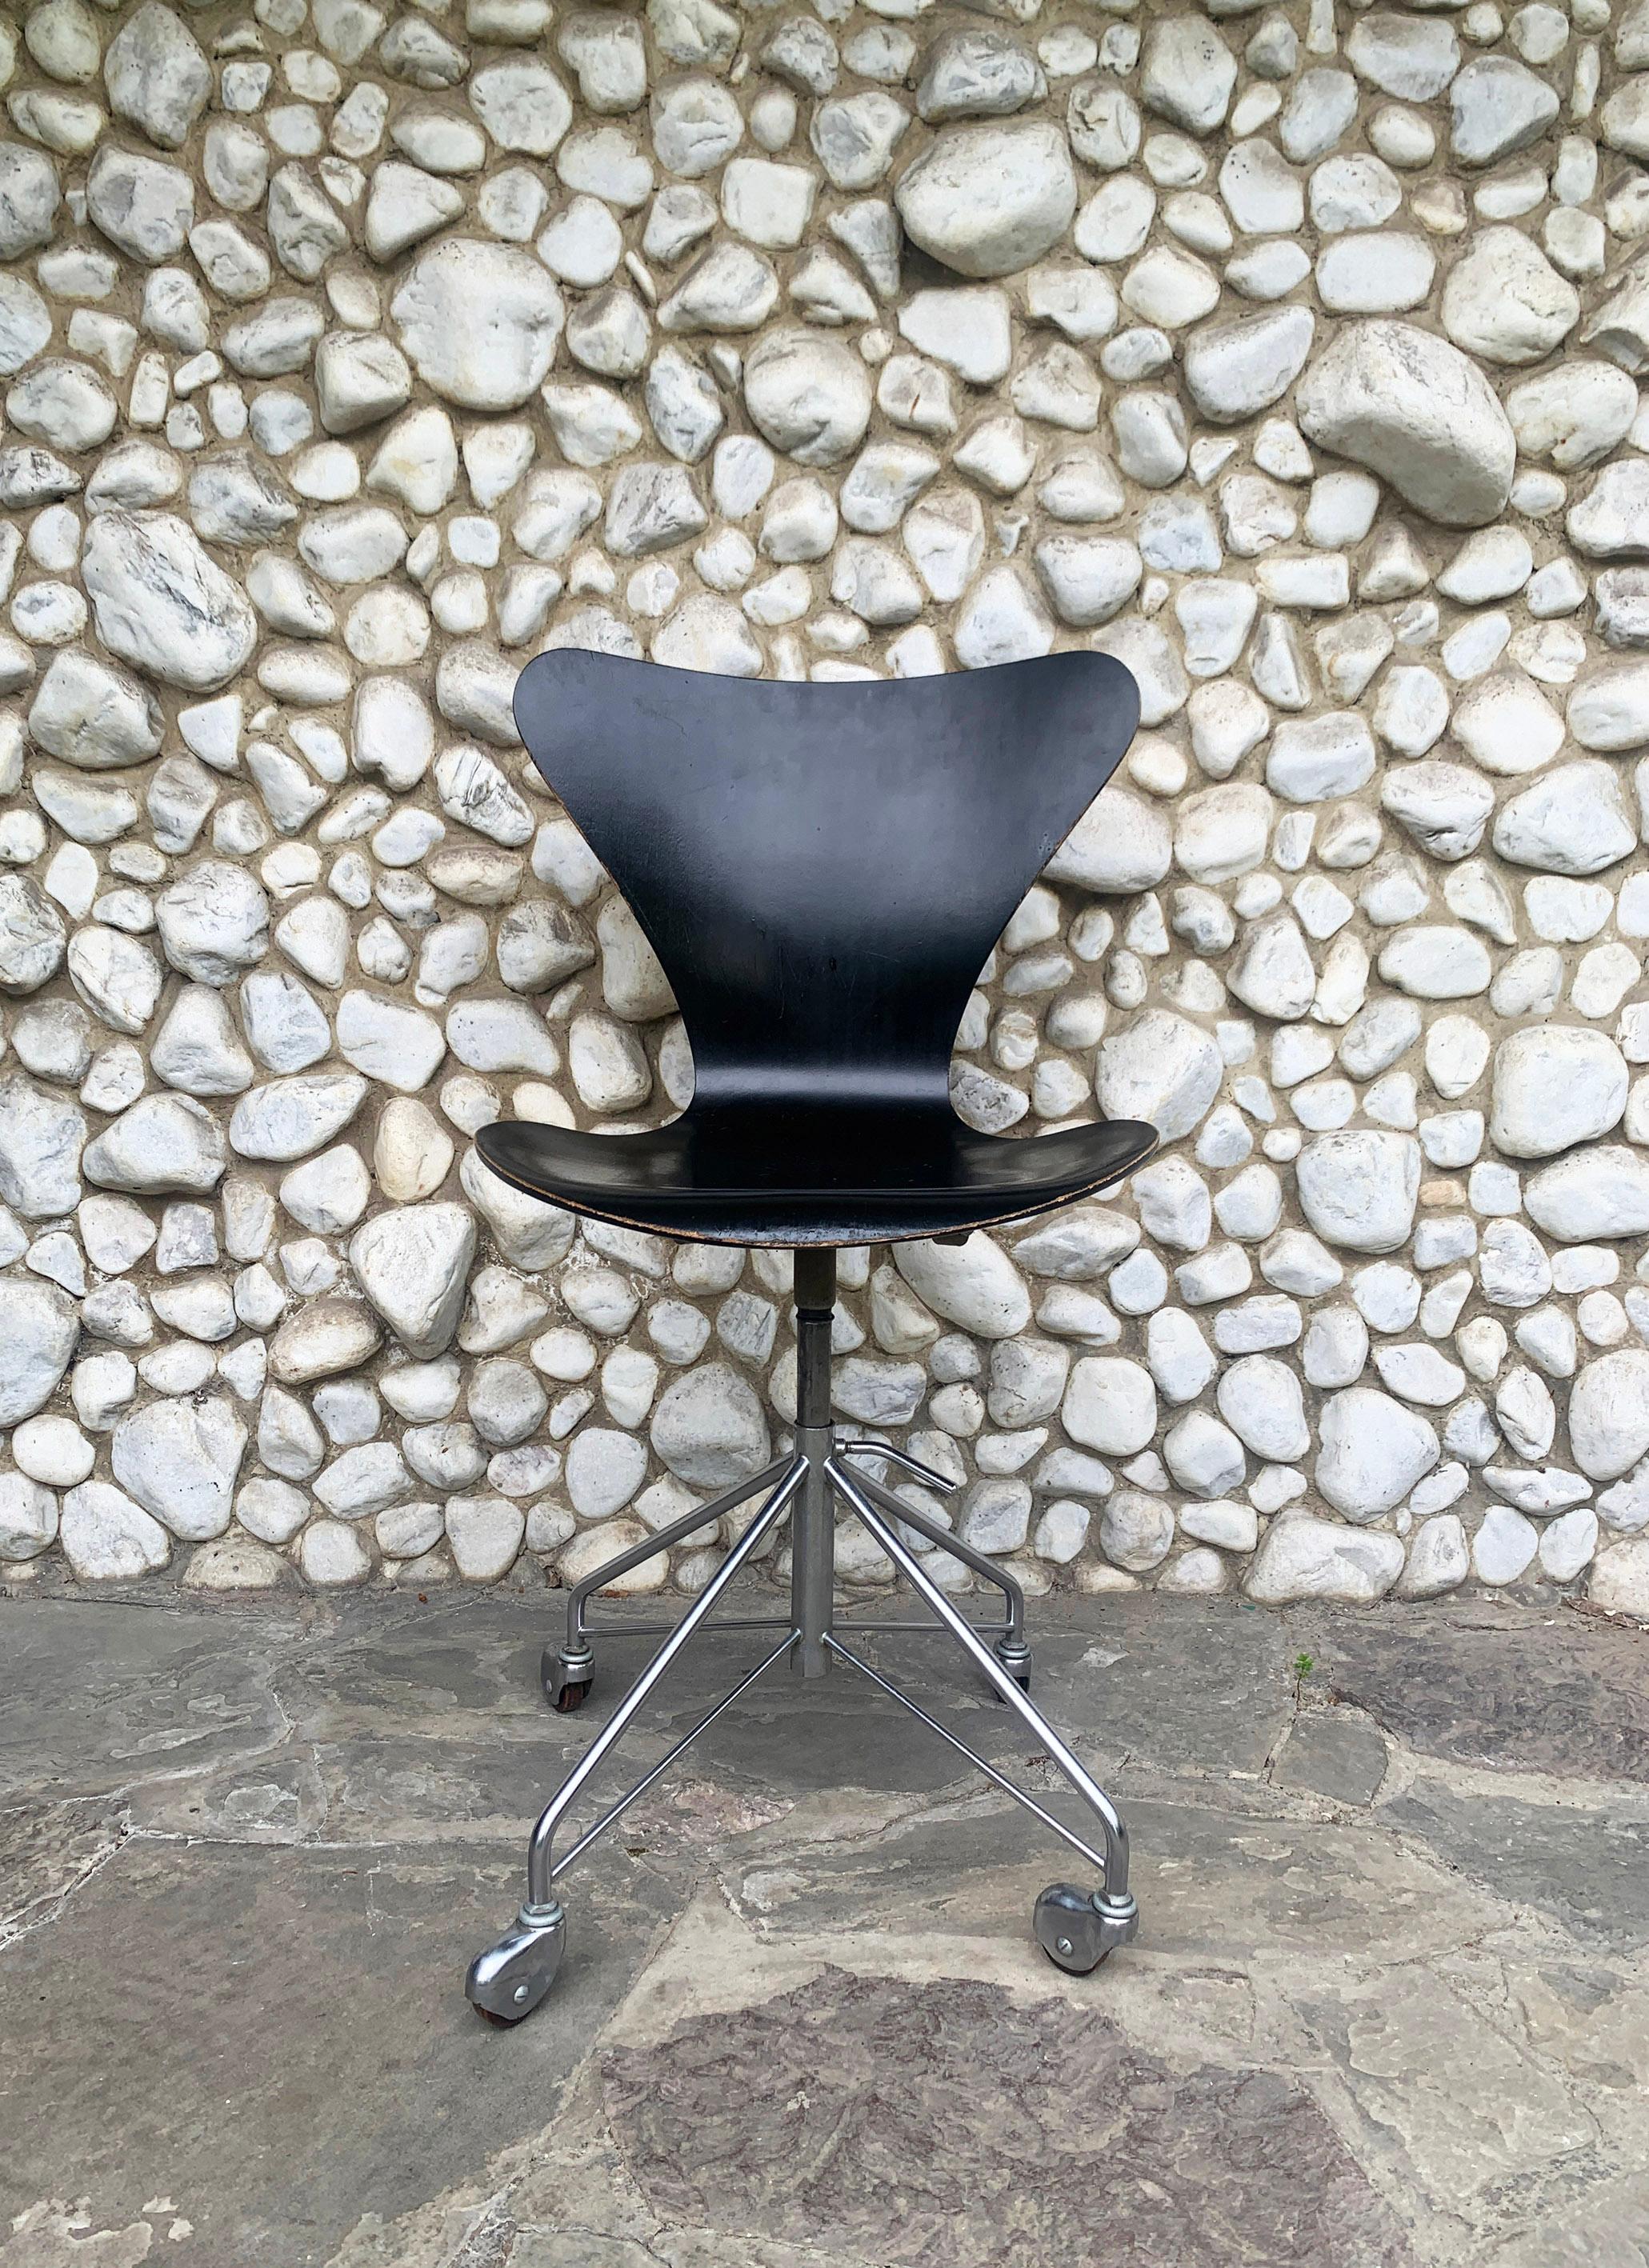 Swivel chair model 3117 in black plywood. Based on the 3107 chair designed by Arne Jacobsen in 1955. 

Produced by Fritz Hansen, Denmark in January 1965. 

Seating height adjustable from 44cm to 54cm. 

Seat in plywood, painted black (original